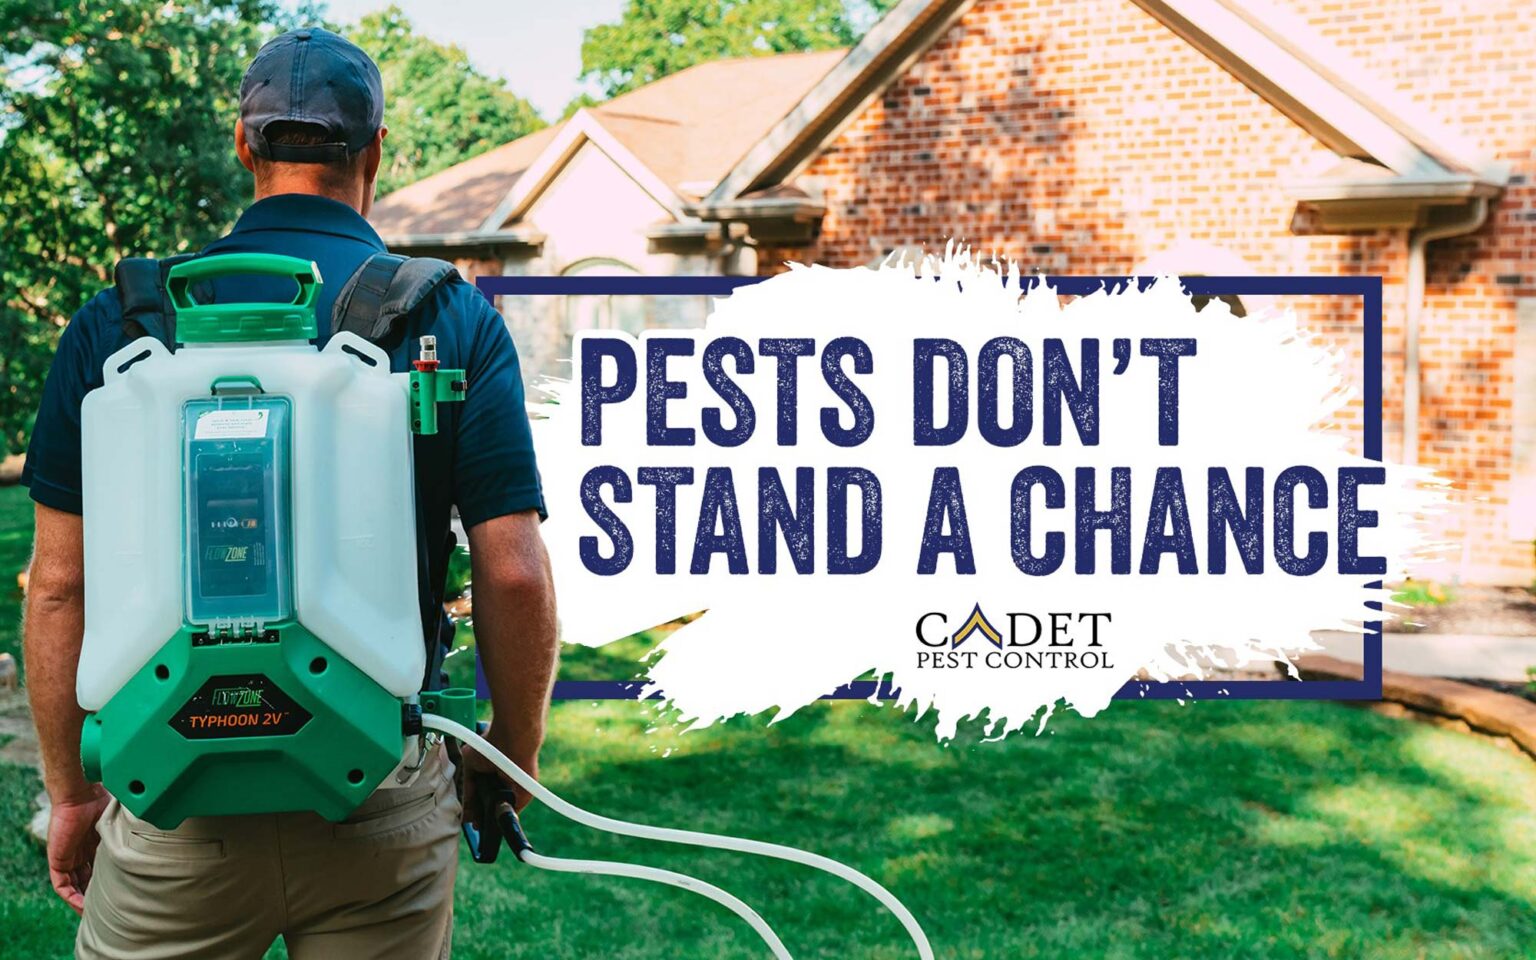 Cadet Pest Control in St. Louis St. Louis Hero Network